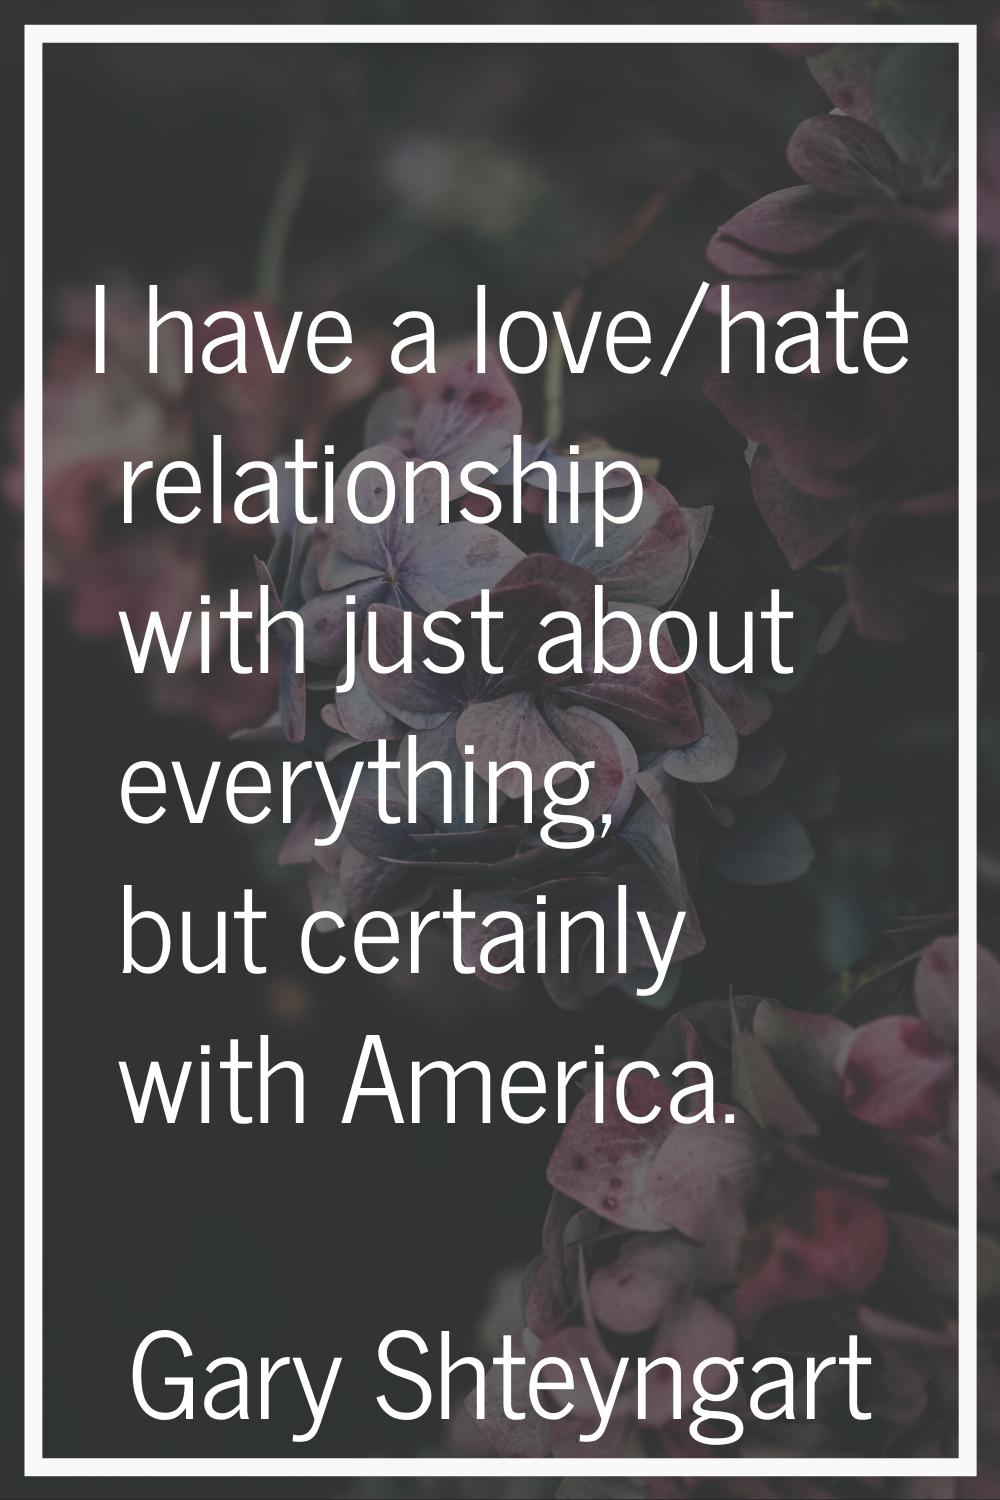 I have a love/hate relationship with just about everything, but certainly with America.